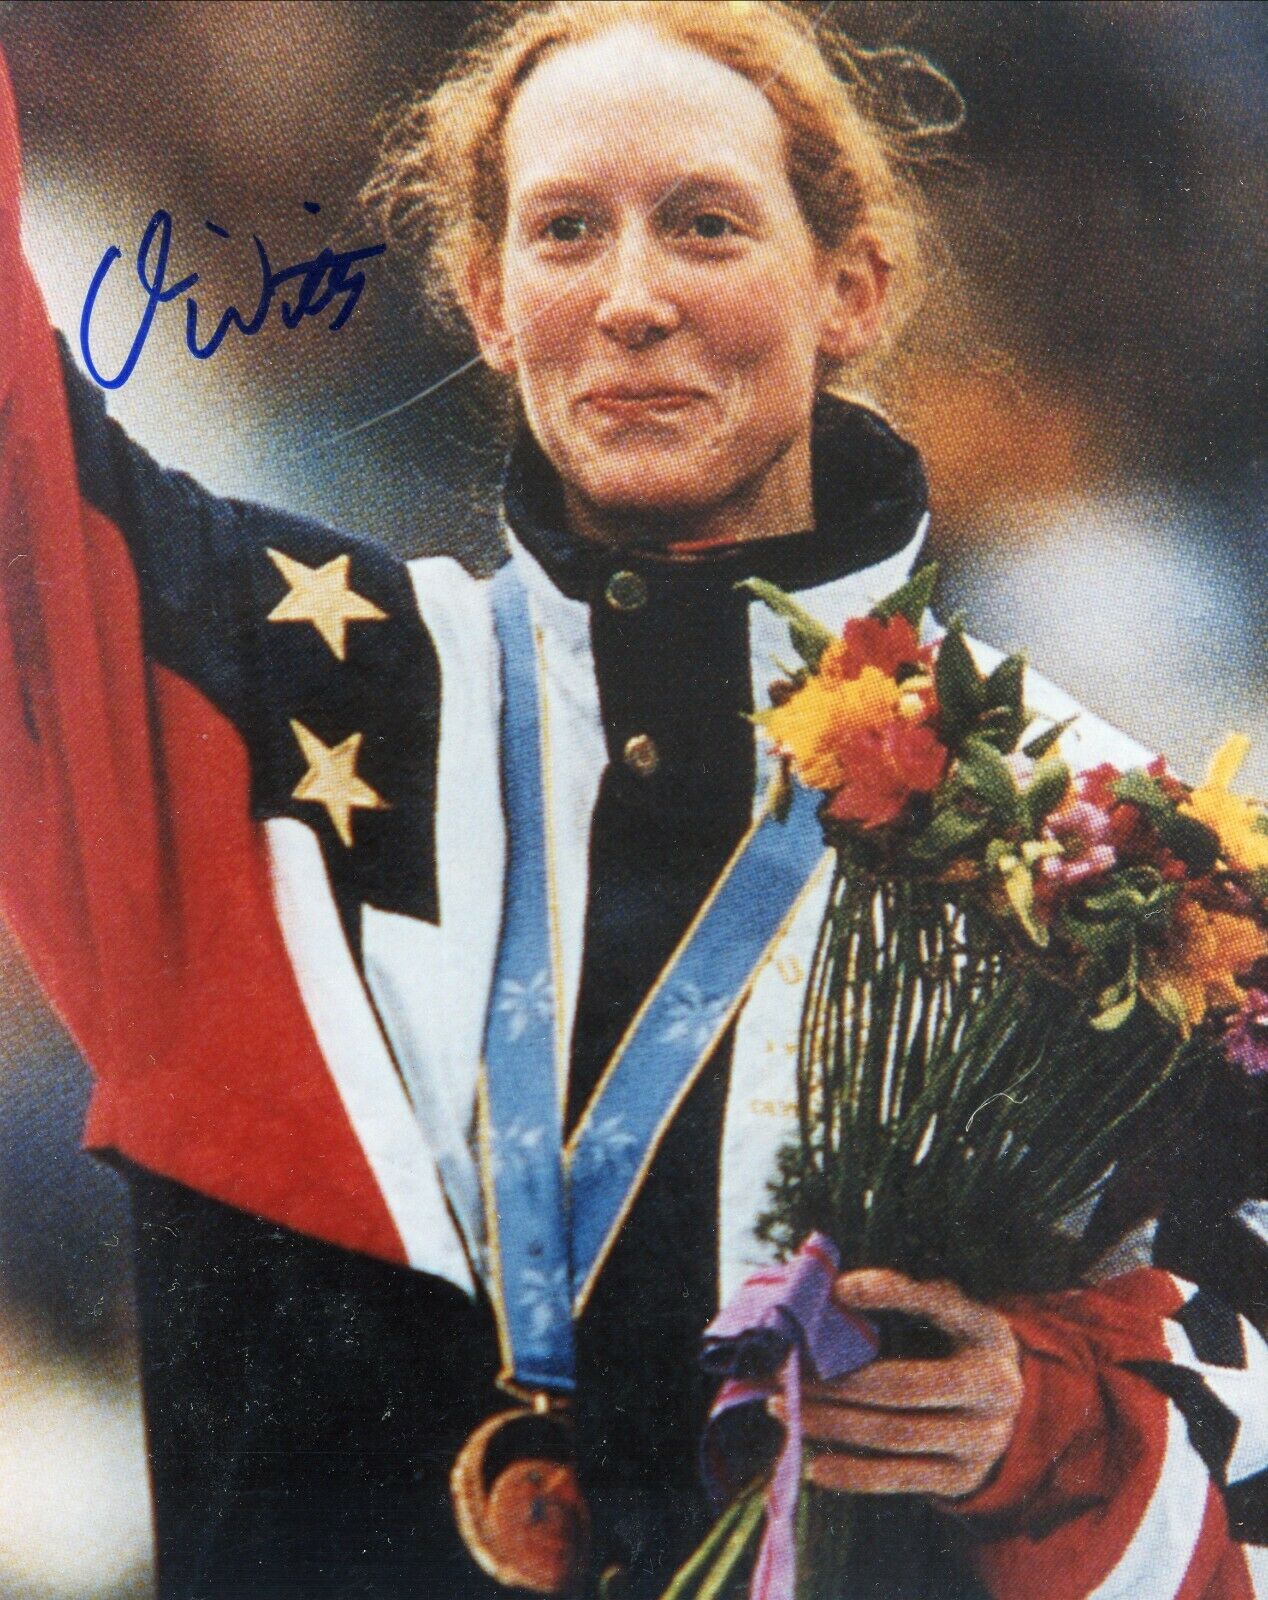 Chris Witty Olympic Gold Medalist Signed Autographed 8x10 Glossy Photo Coa